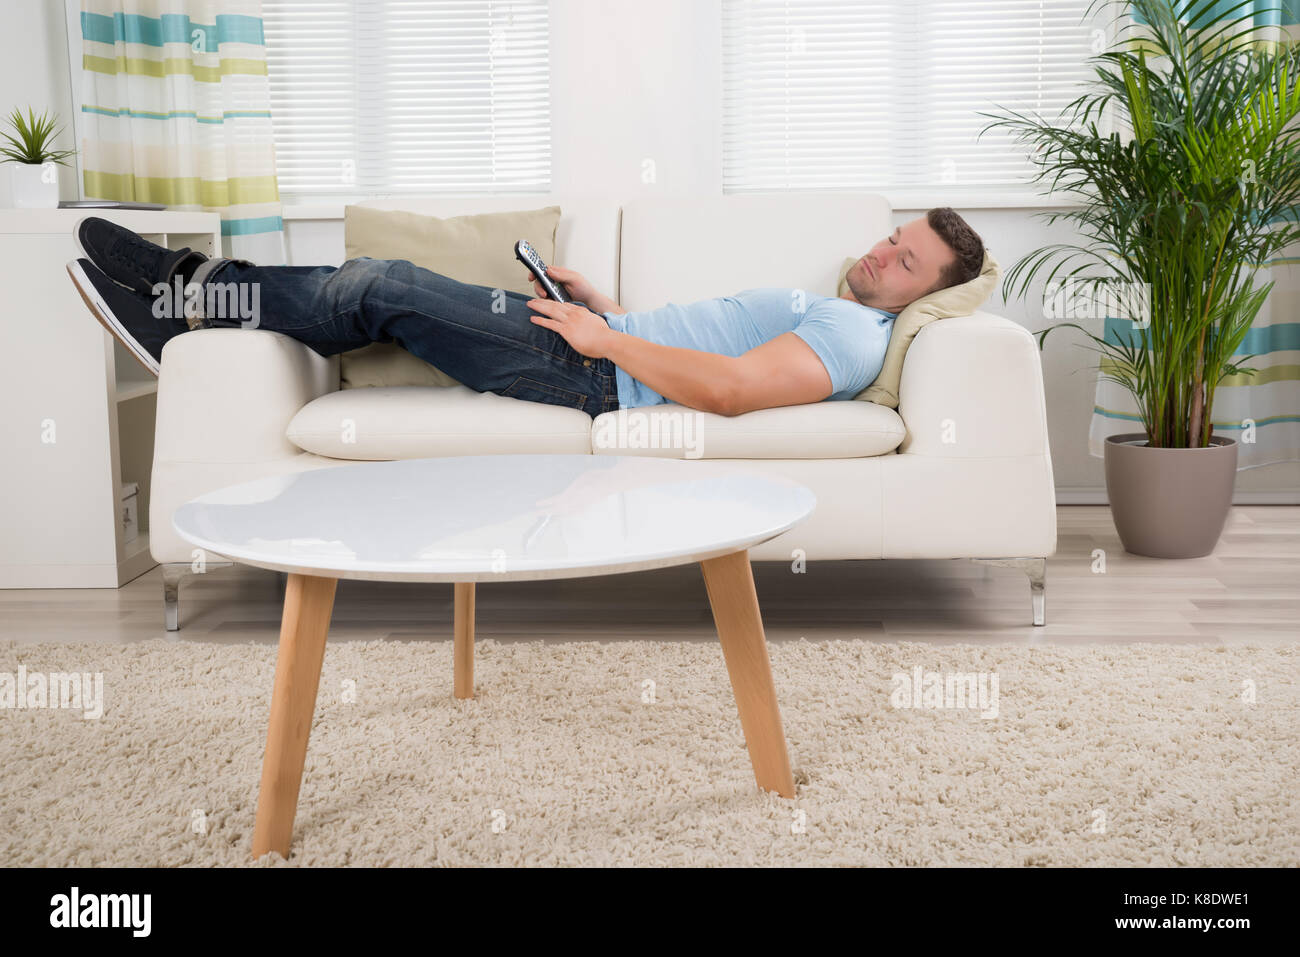 Full length of mid adult man with remote control sleeping on sofa at home Stock Photo